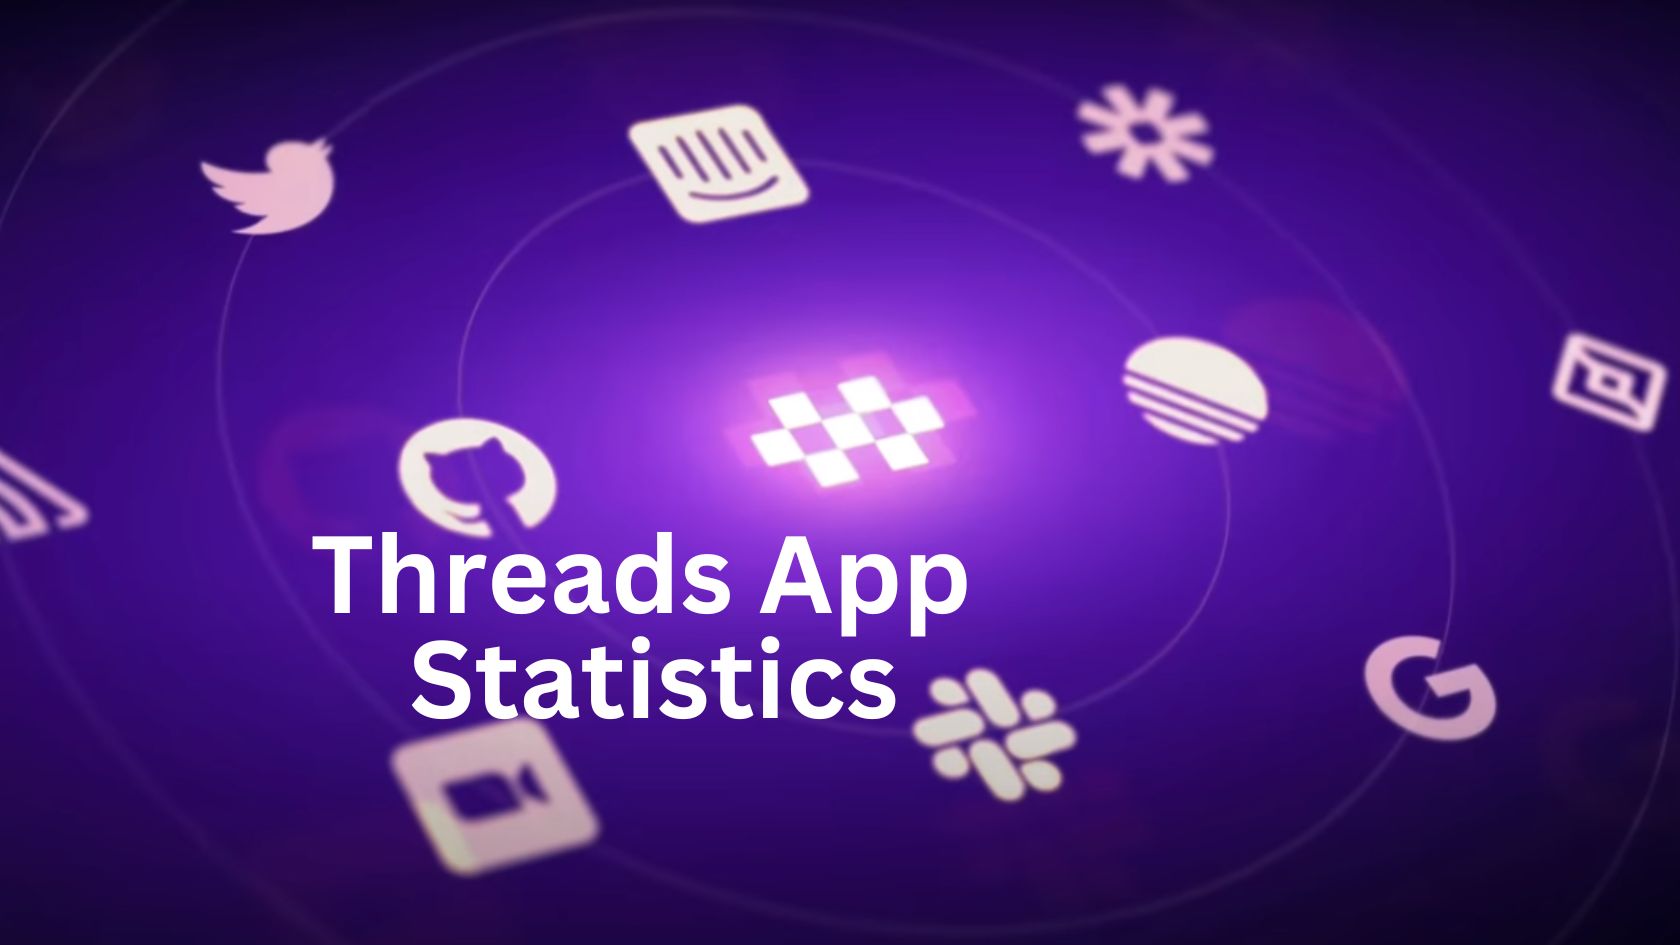 Threads App Statistics By Demographics, Sign-Ups, User Growth, Revenue, History, Top Influencers